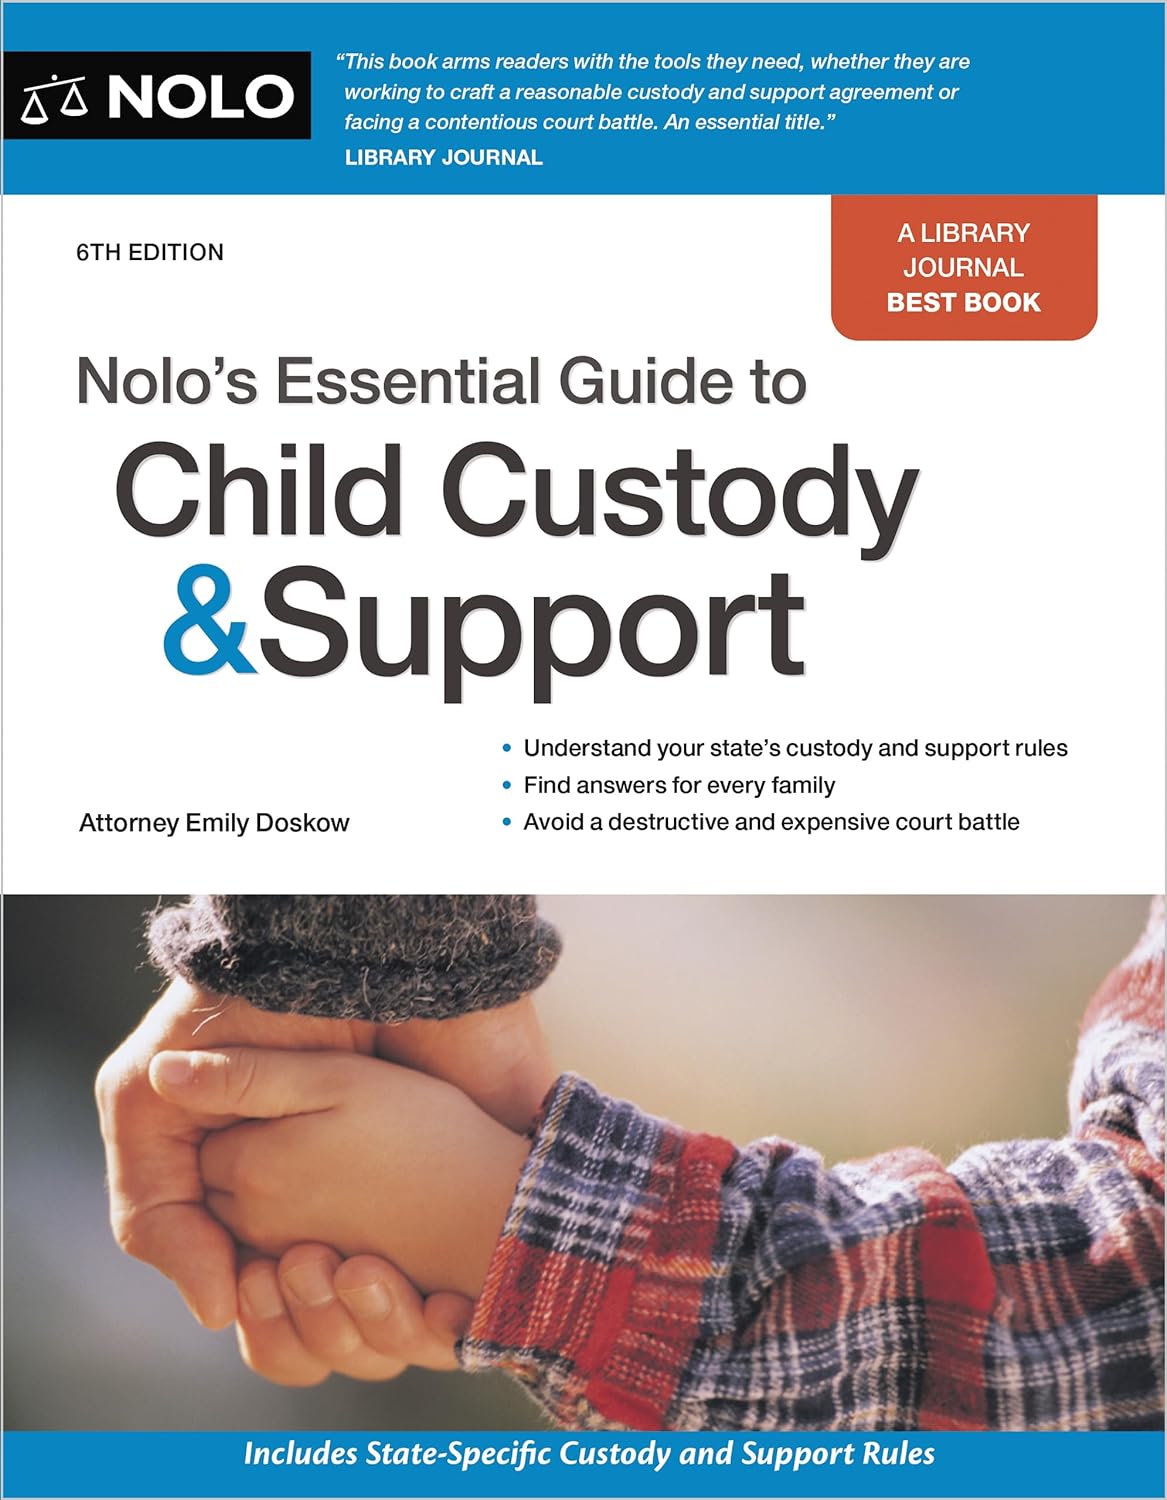 Nolo's Essential Guide to Child Custody and Support (6TH ed.) - SureShot Books Publishing LLC 